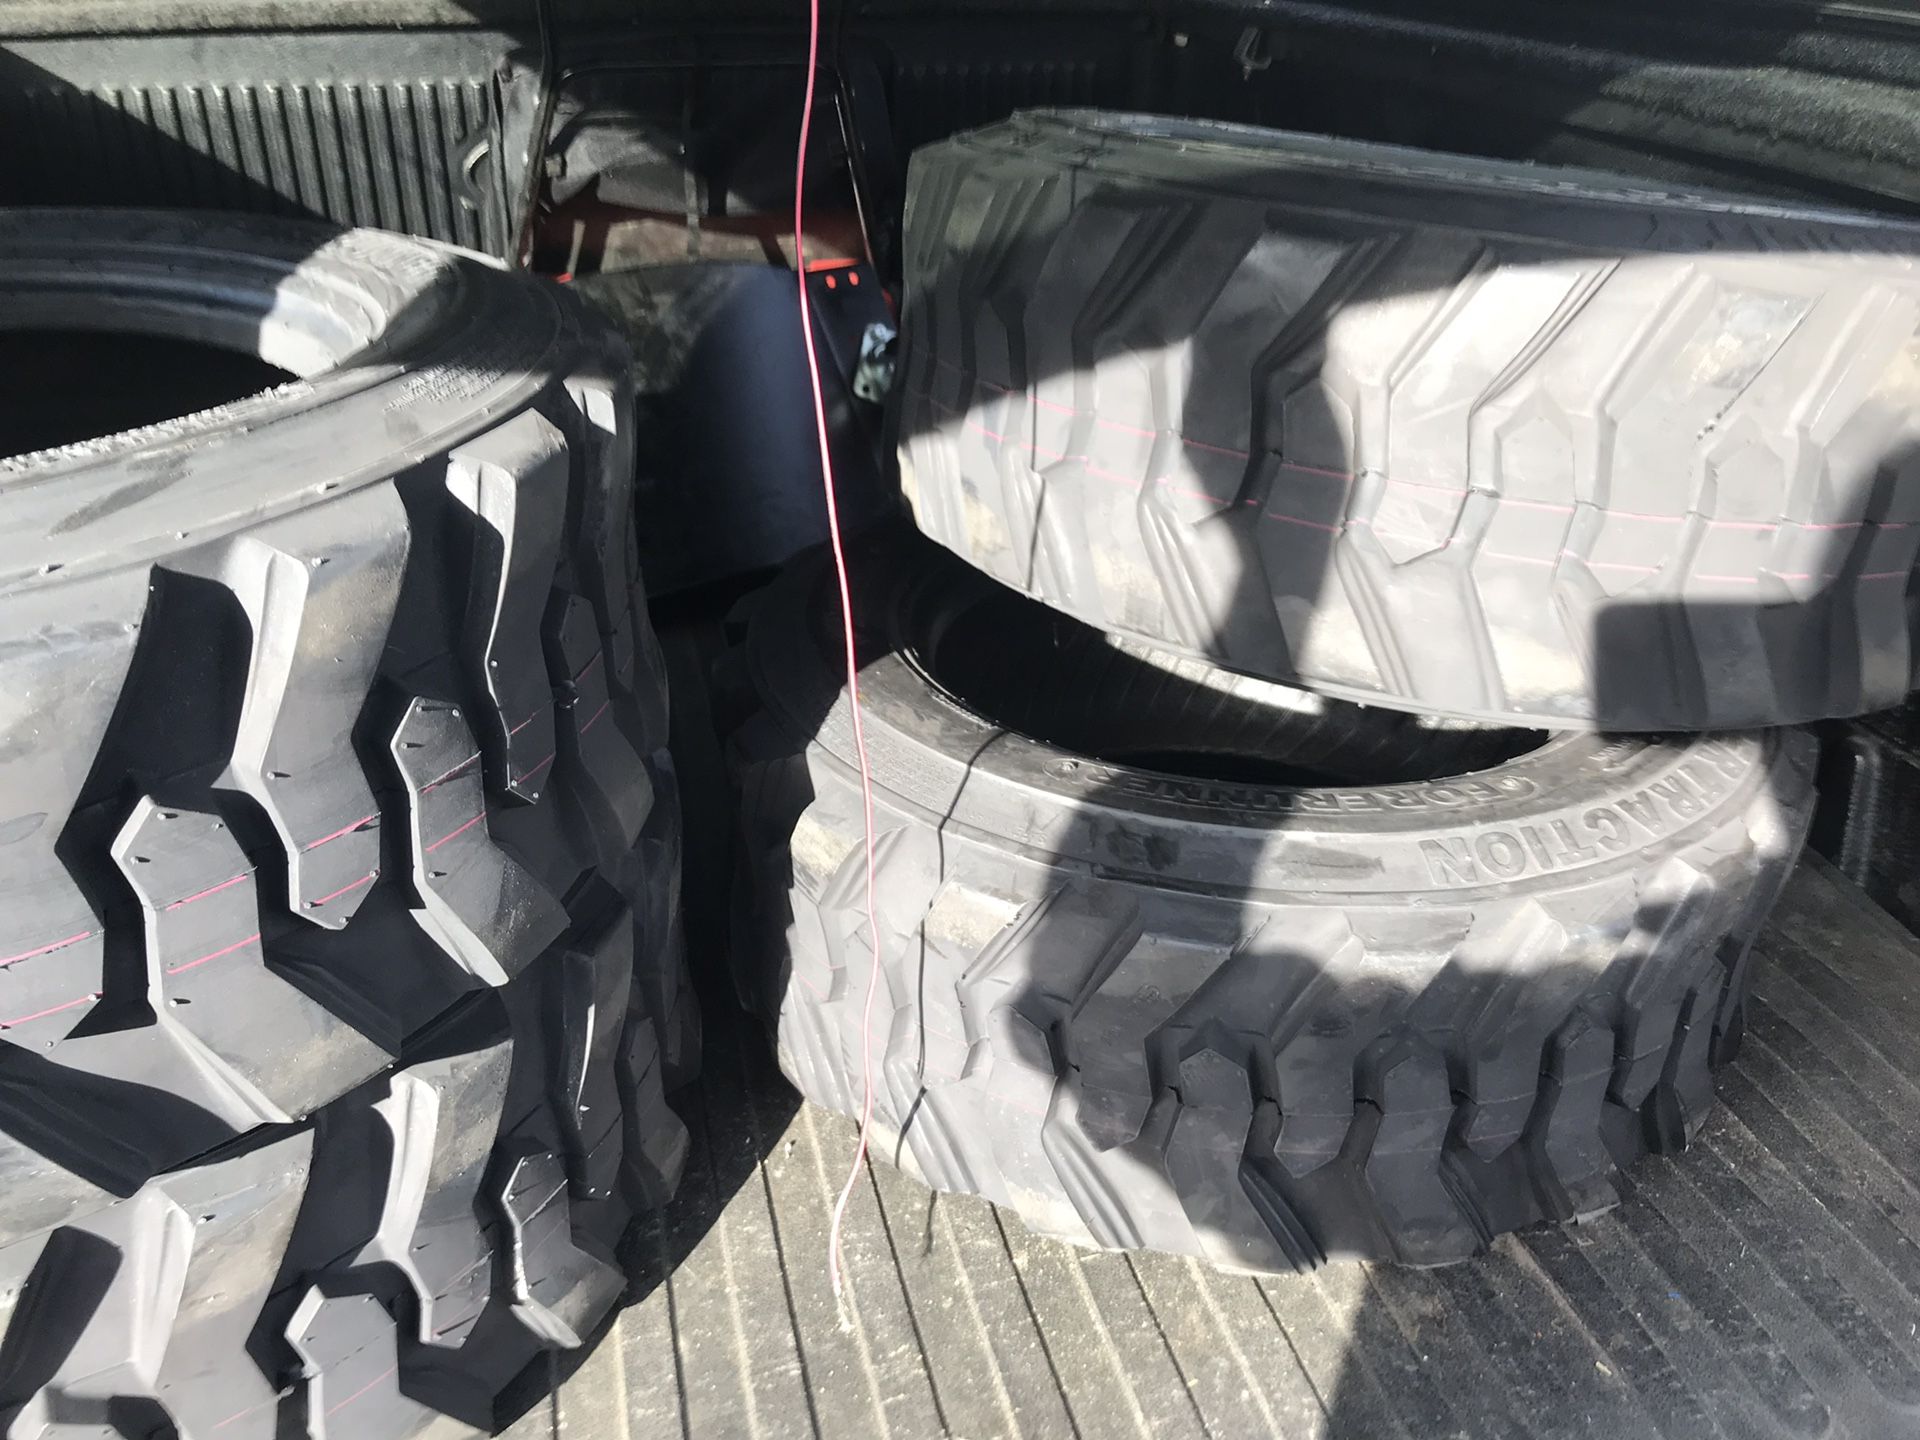 4x Bobcat tires skid steer 10-16.5 12ply $425 no bargain price firm